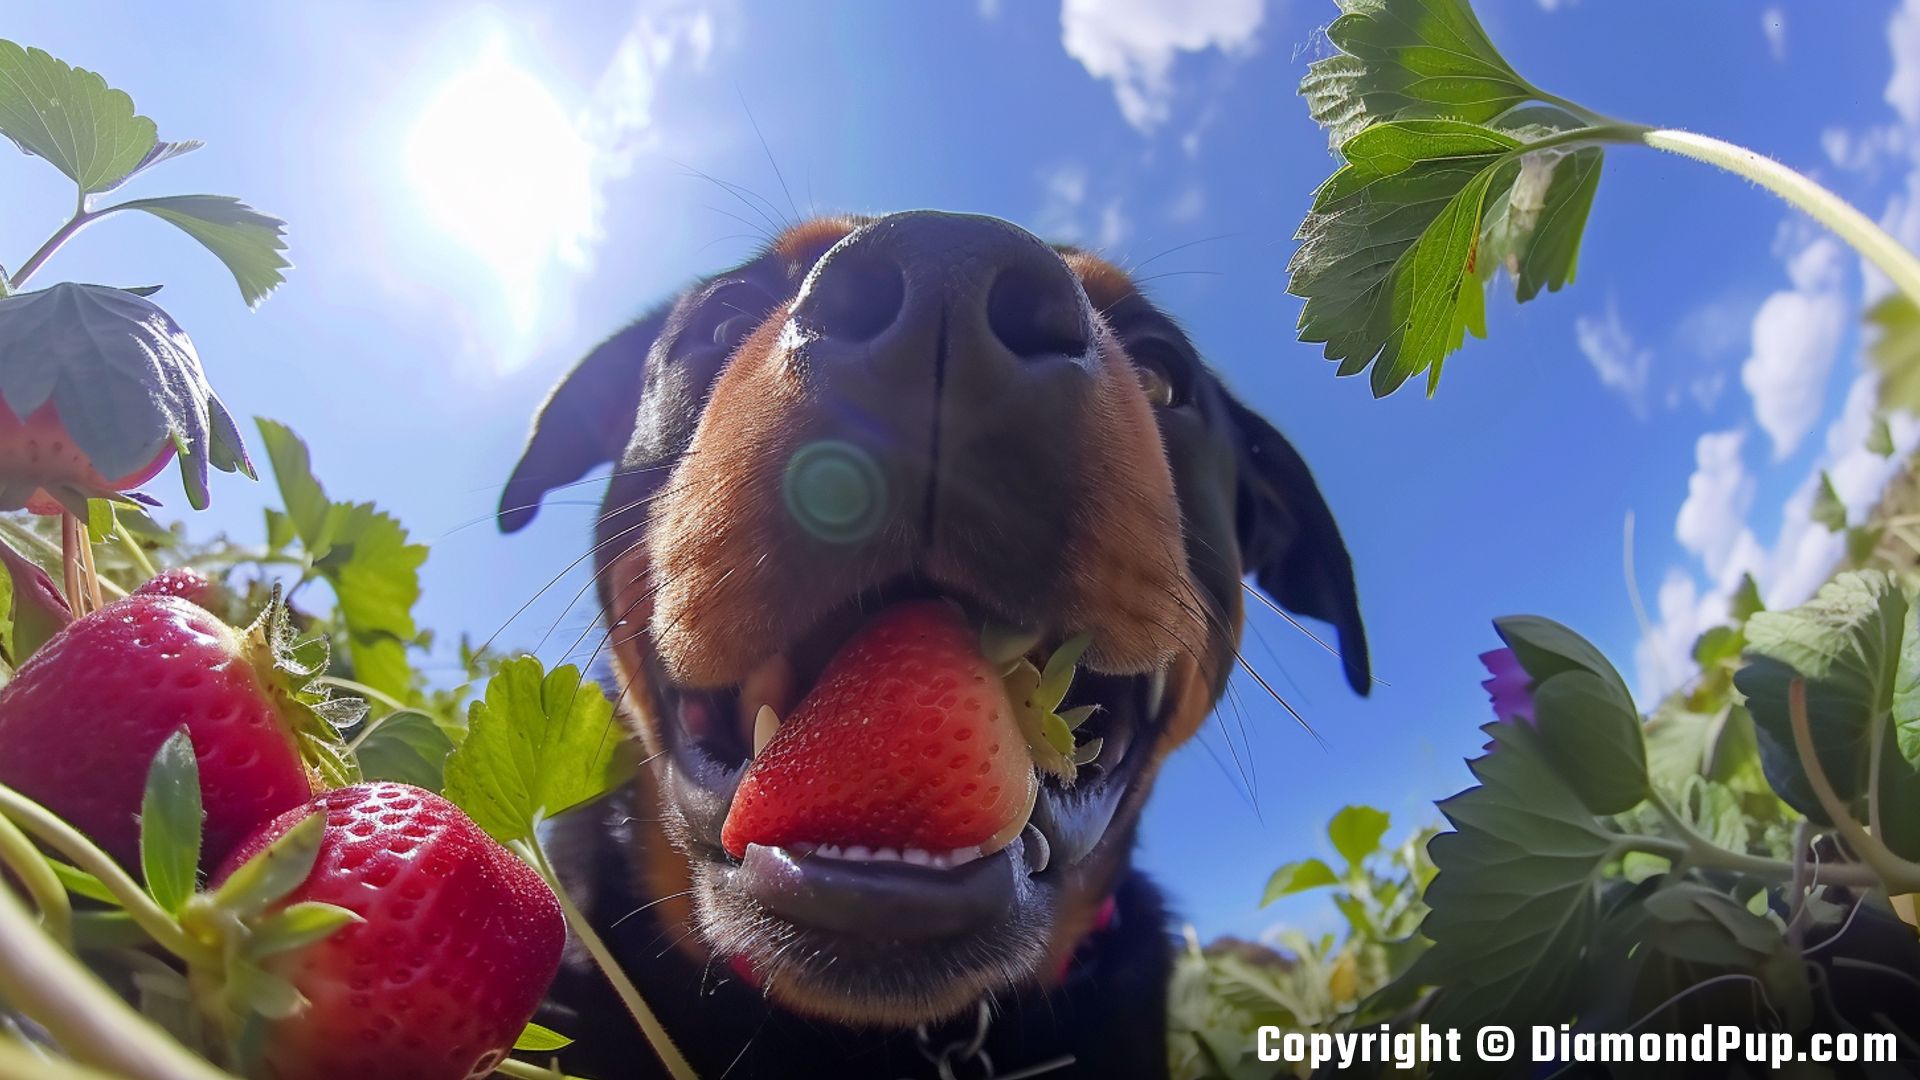 Photograph of Rottweiler Snacking on Strawberries